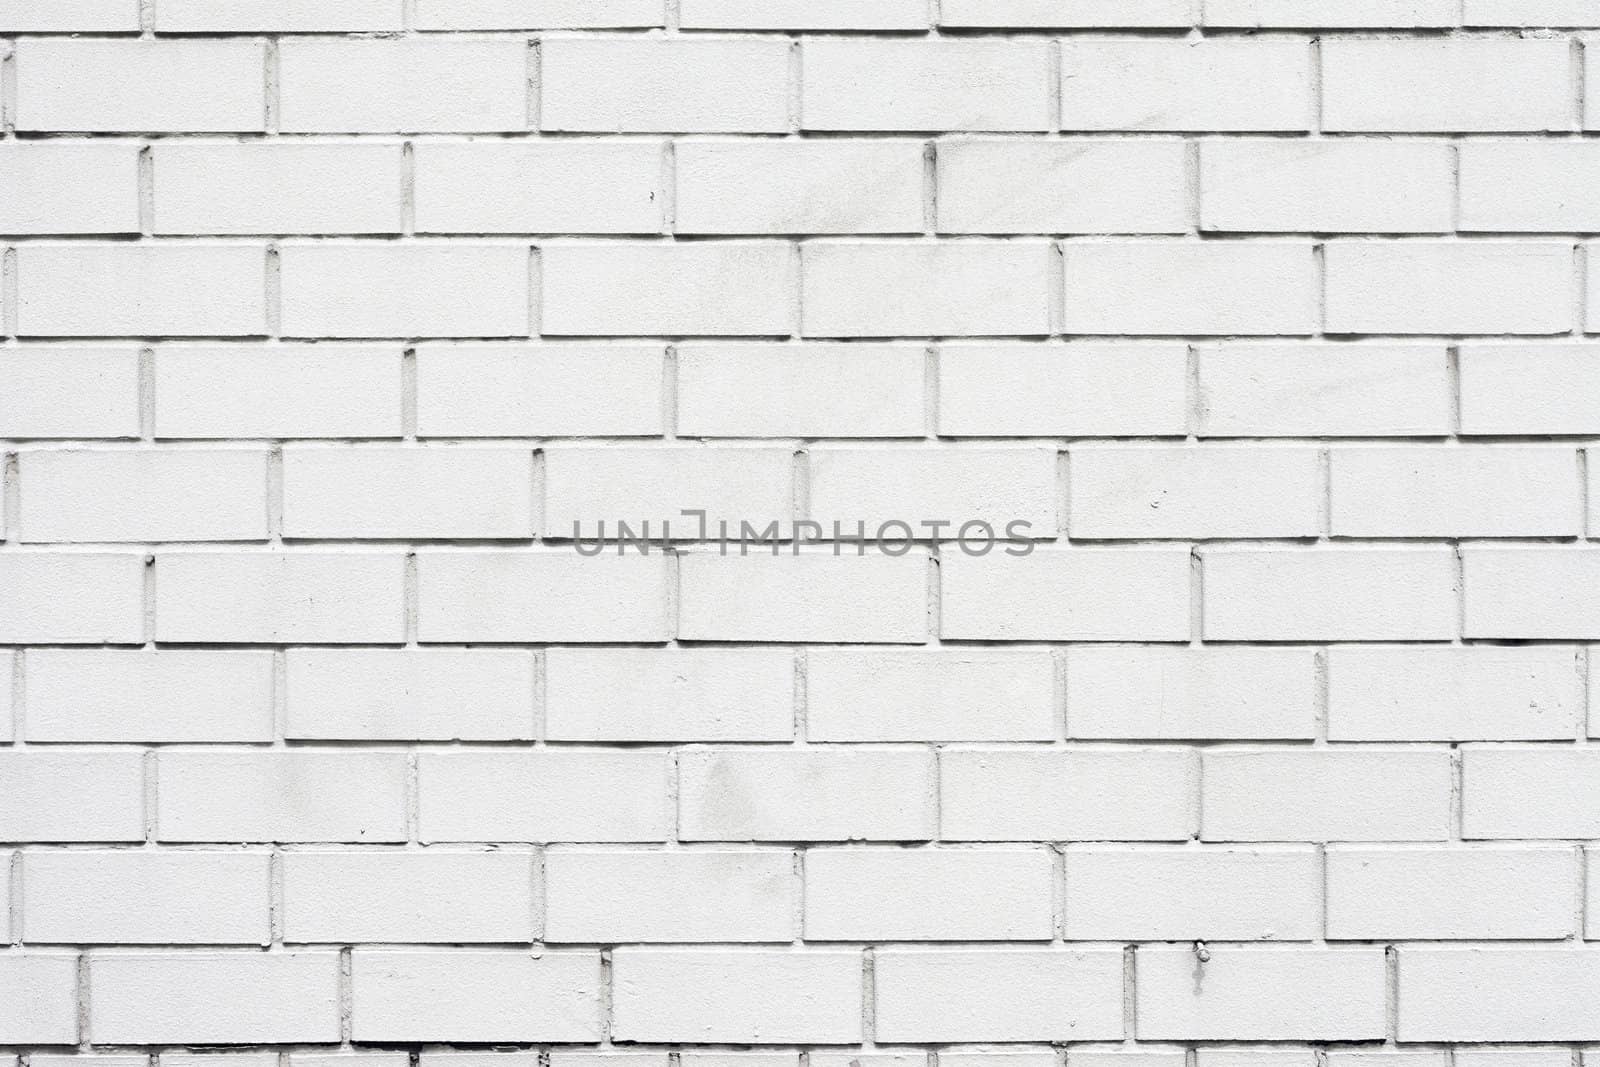 Vintage or grungy white background of natural cement or stone old texture as a retro pattern wall